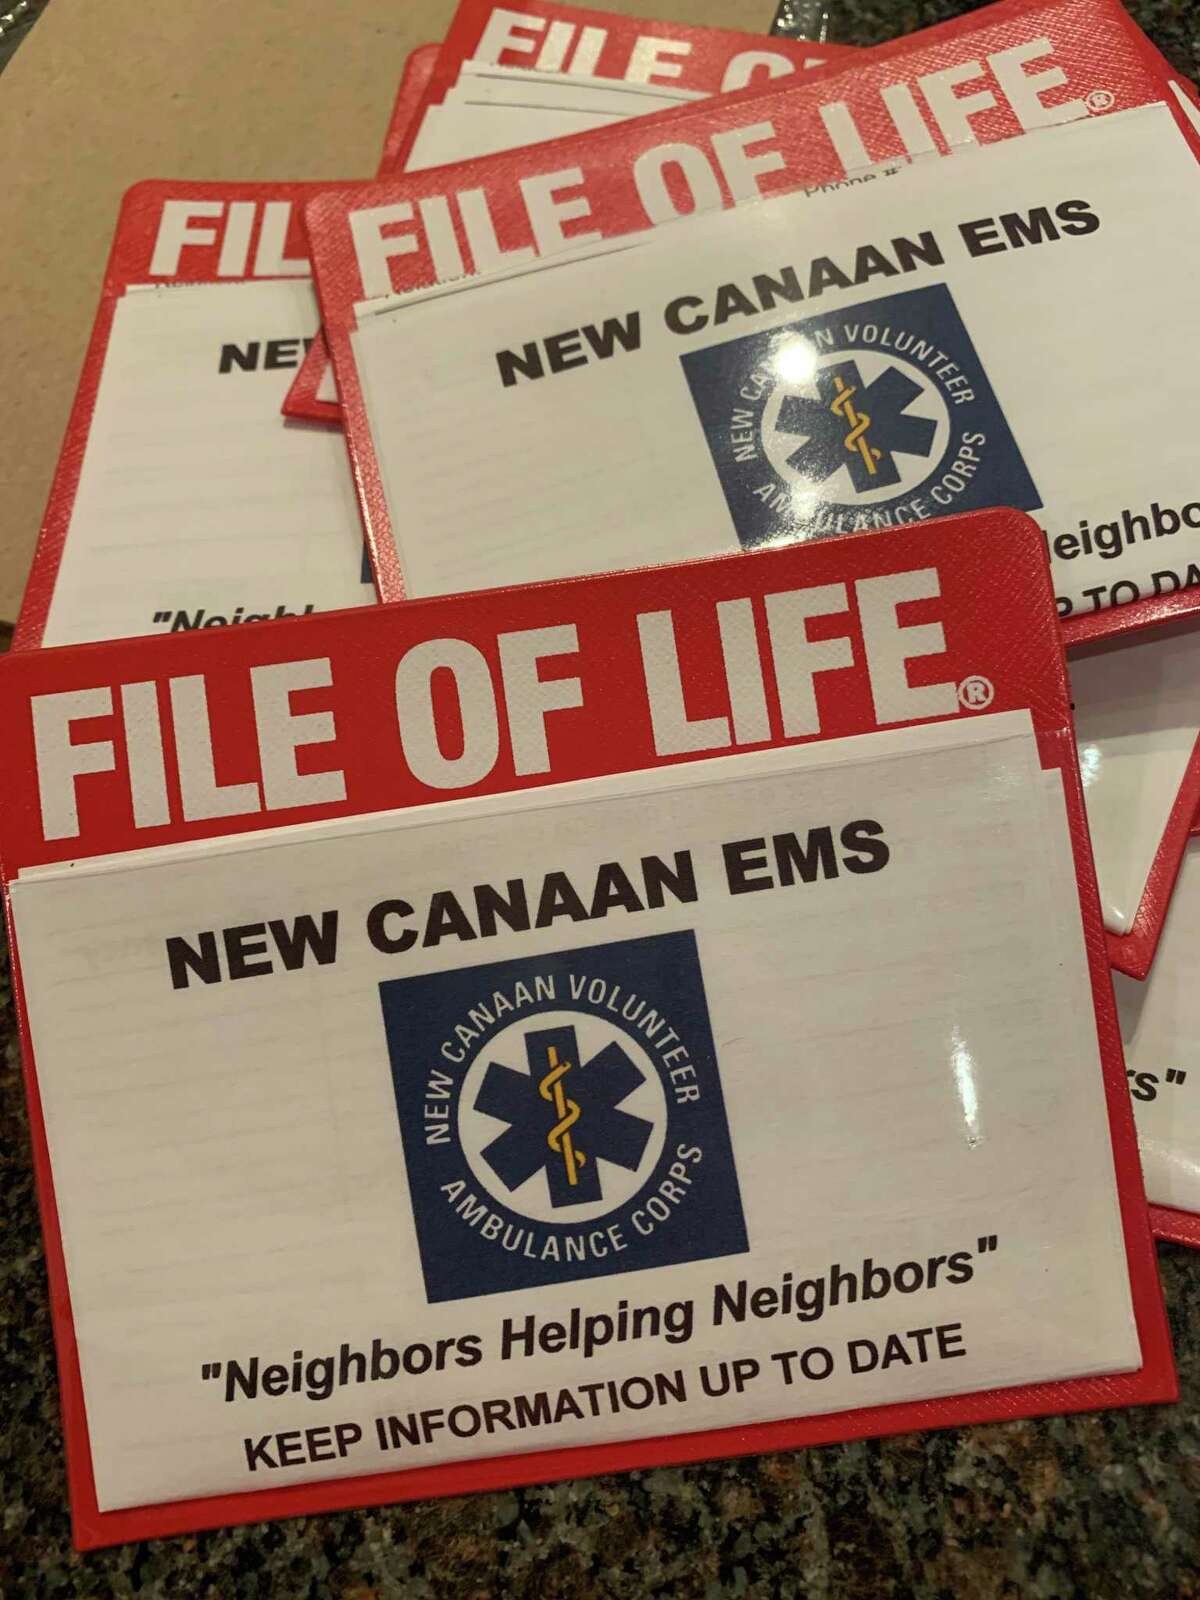 The File of Life, which is a simple document, provides a single place to record important medical information for use during an emergency. Barbara Achenbaum, who is the executive director of the nonprofit organization Staying Put in New Canaan, writes about communication being key in such an event where the File becomes extremely handy, and National Healthcare Decisions Day, in this column. National Healthcare Decisions Day is on Thursday, April 16, 2020.